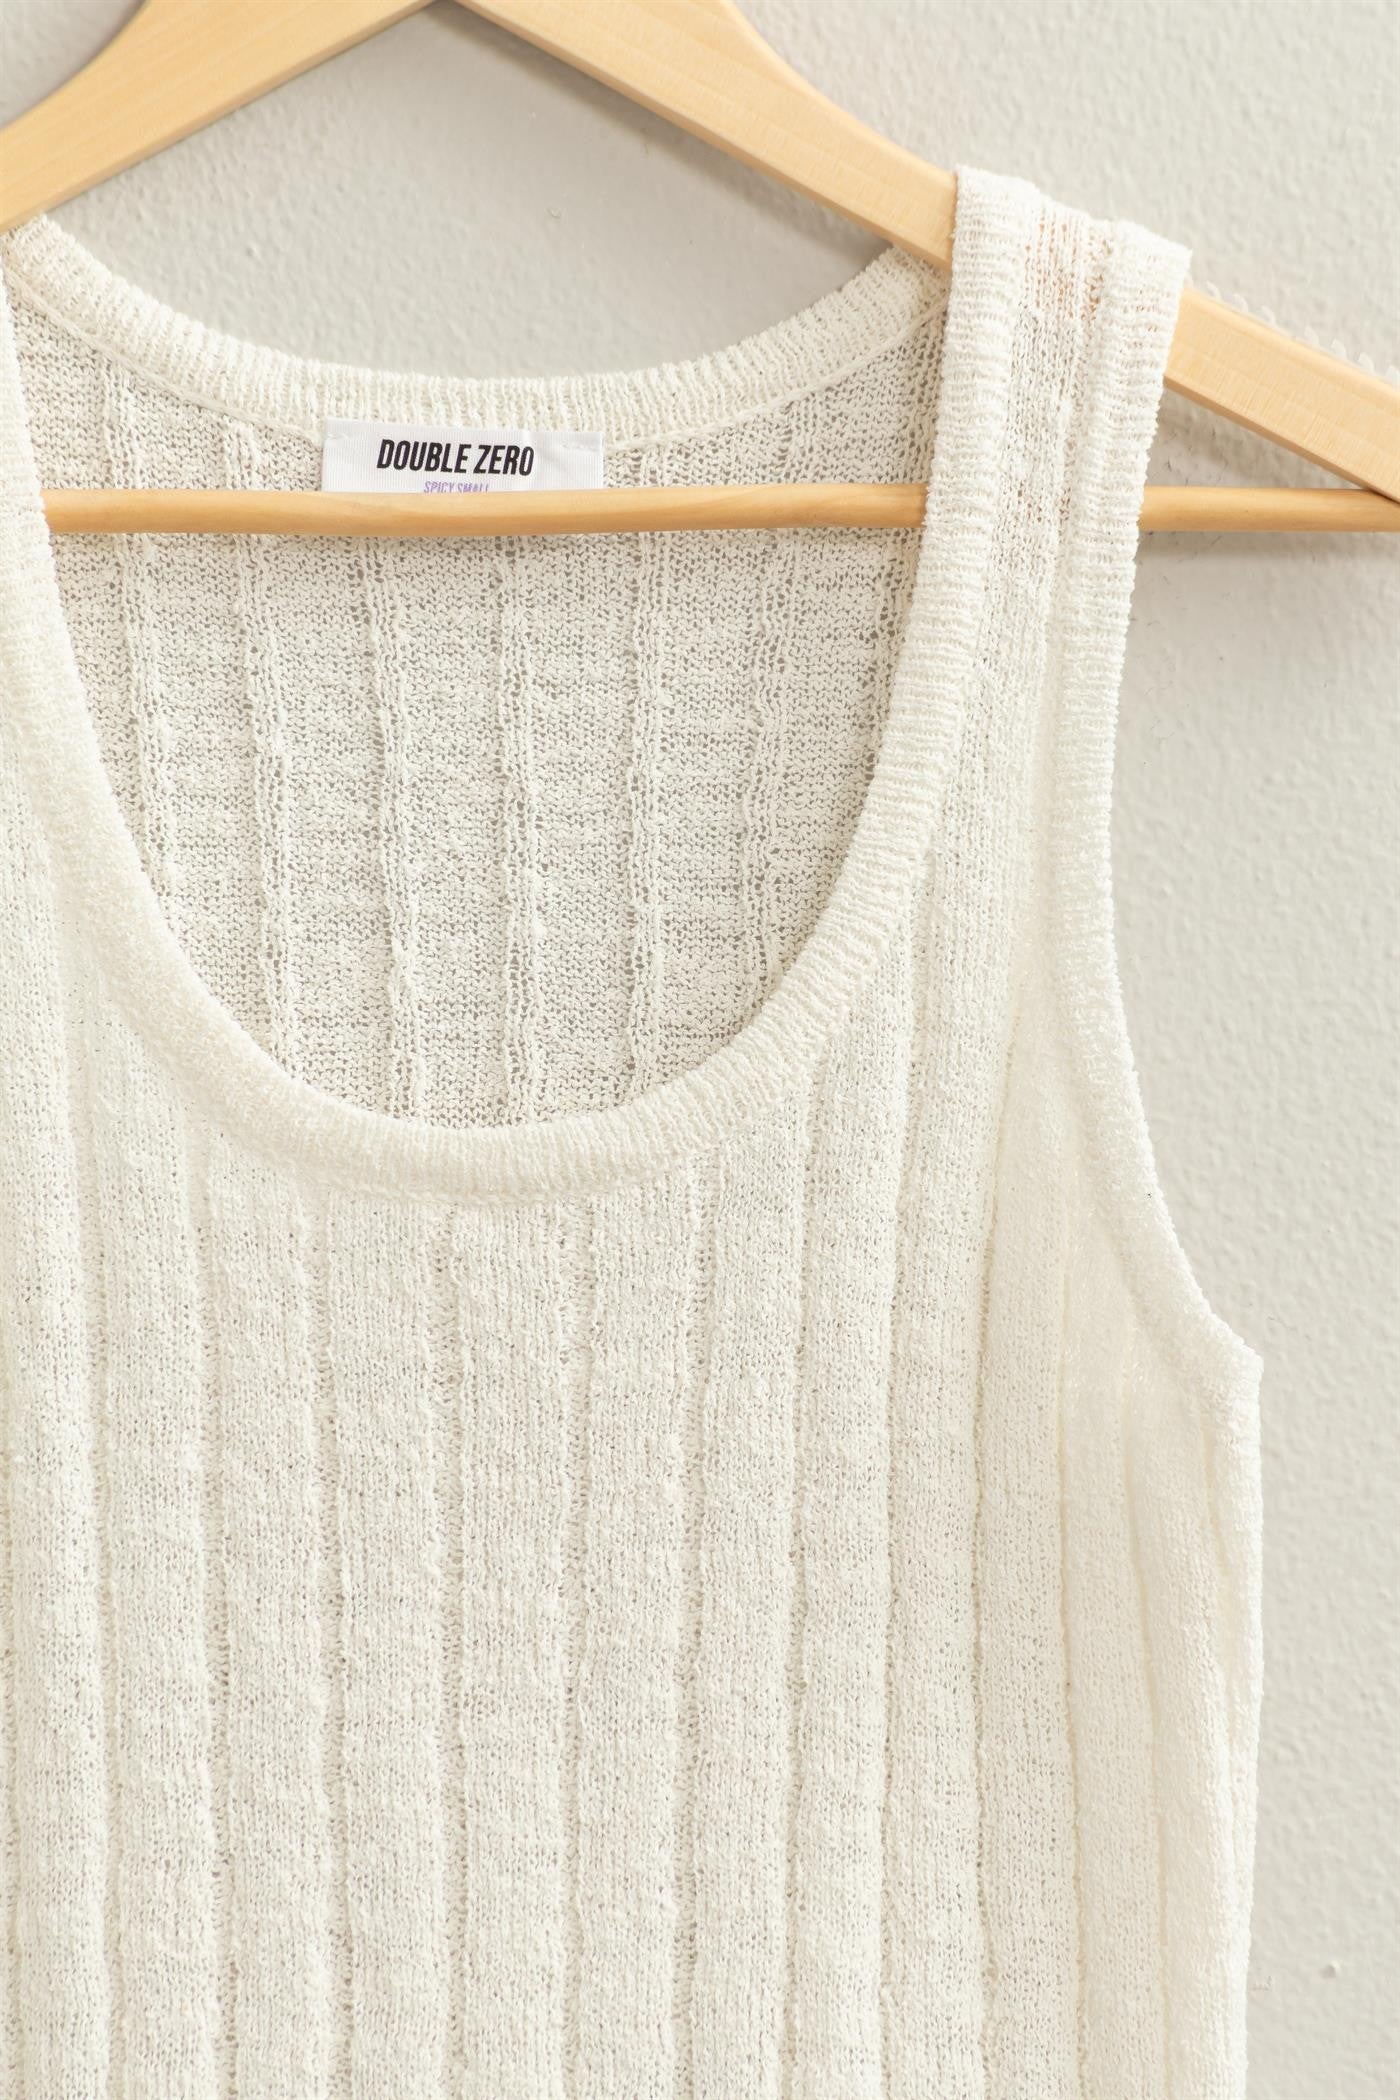 full length ribbed sweater tank, lightweight, semi see through sweater material, scoop neck